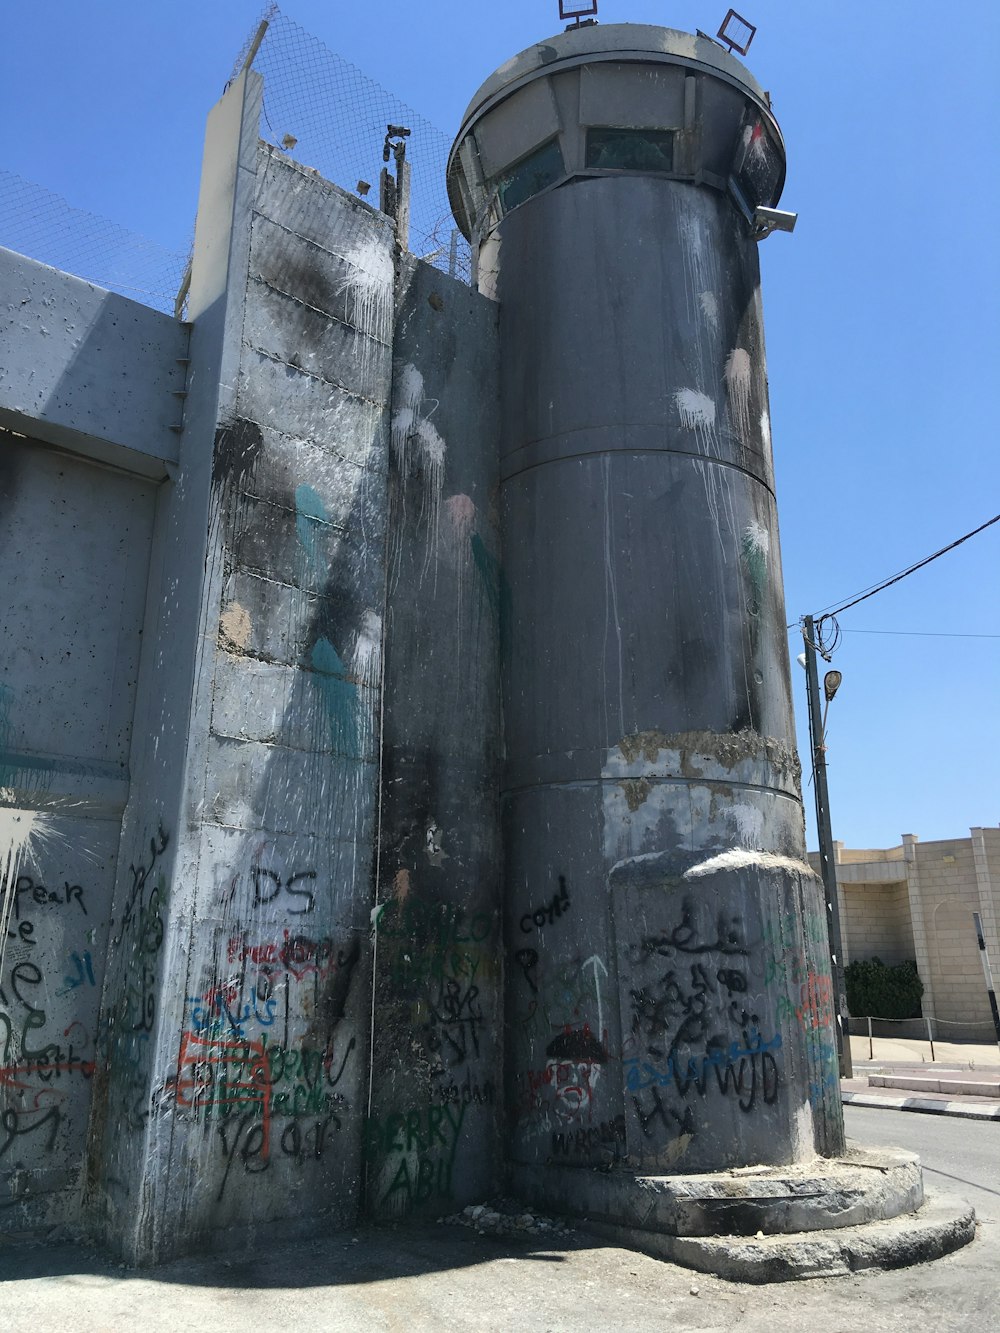 a concrete structure with graffiti on the side of it